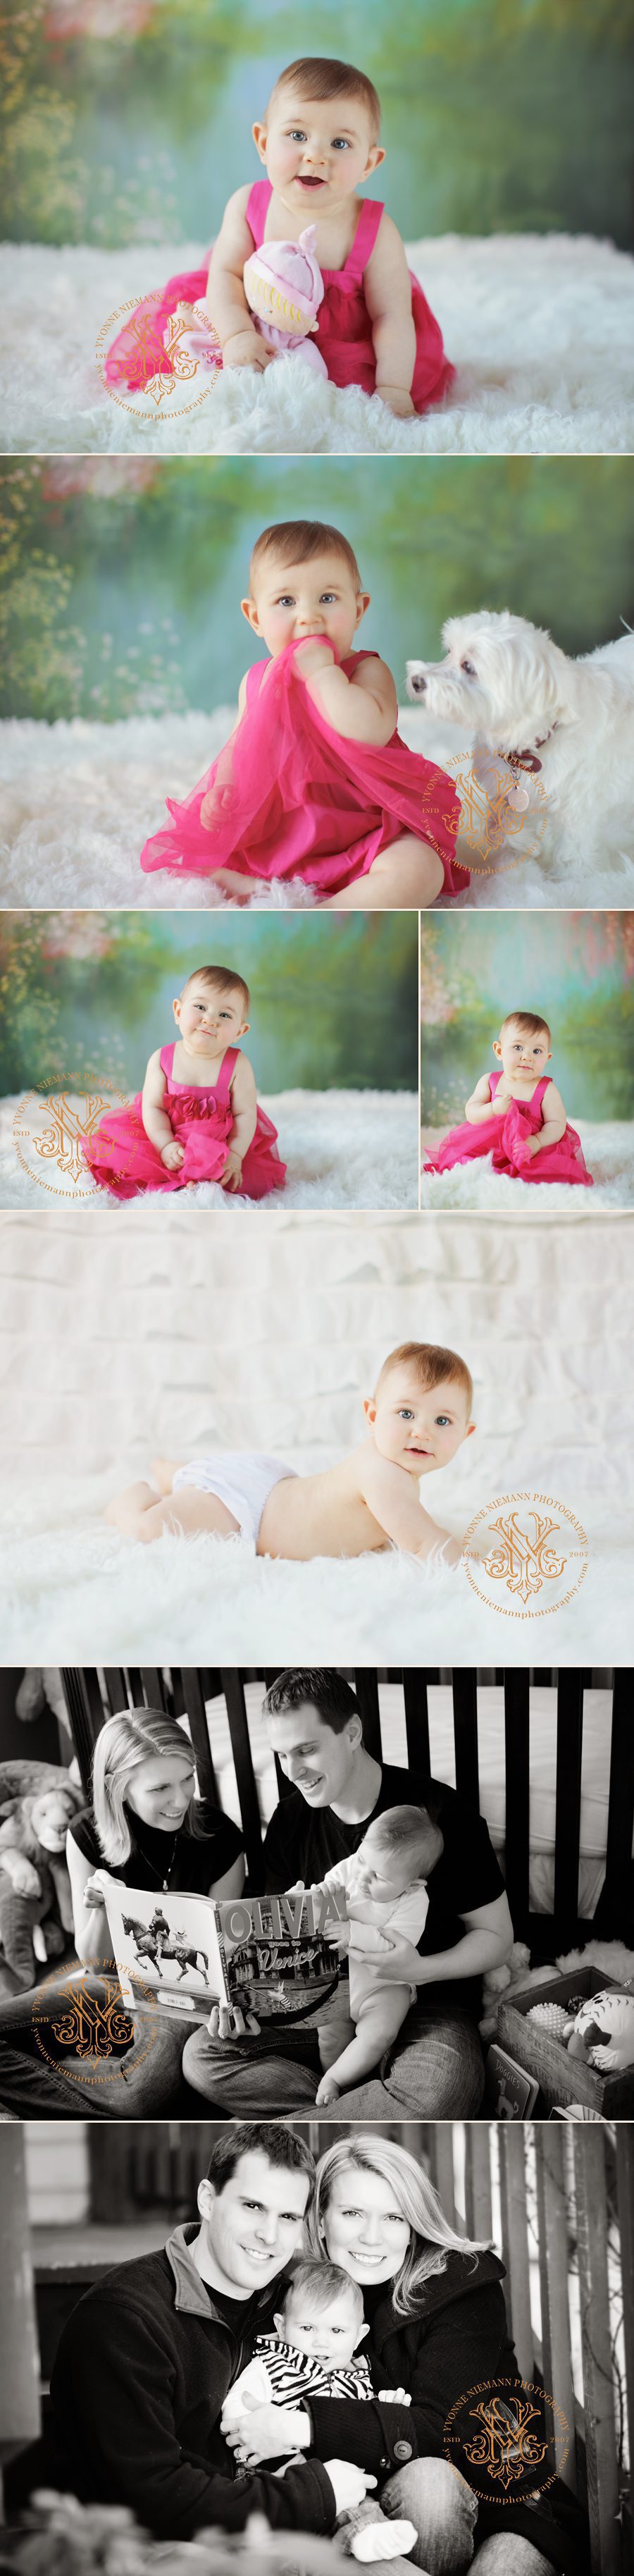 St. Louis Baby Portraits of a 7 month old girl taken by Yvonne Niemann Photography.